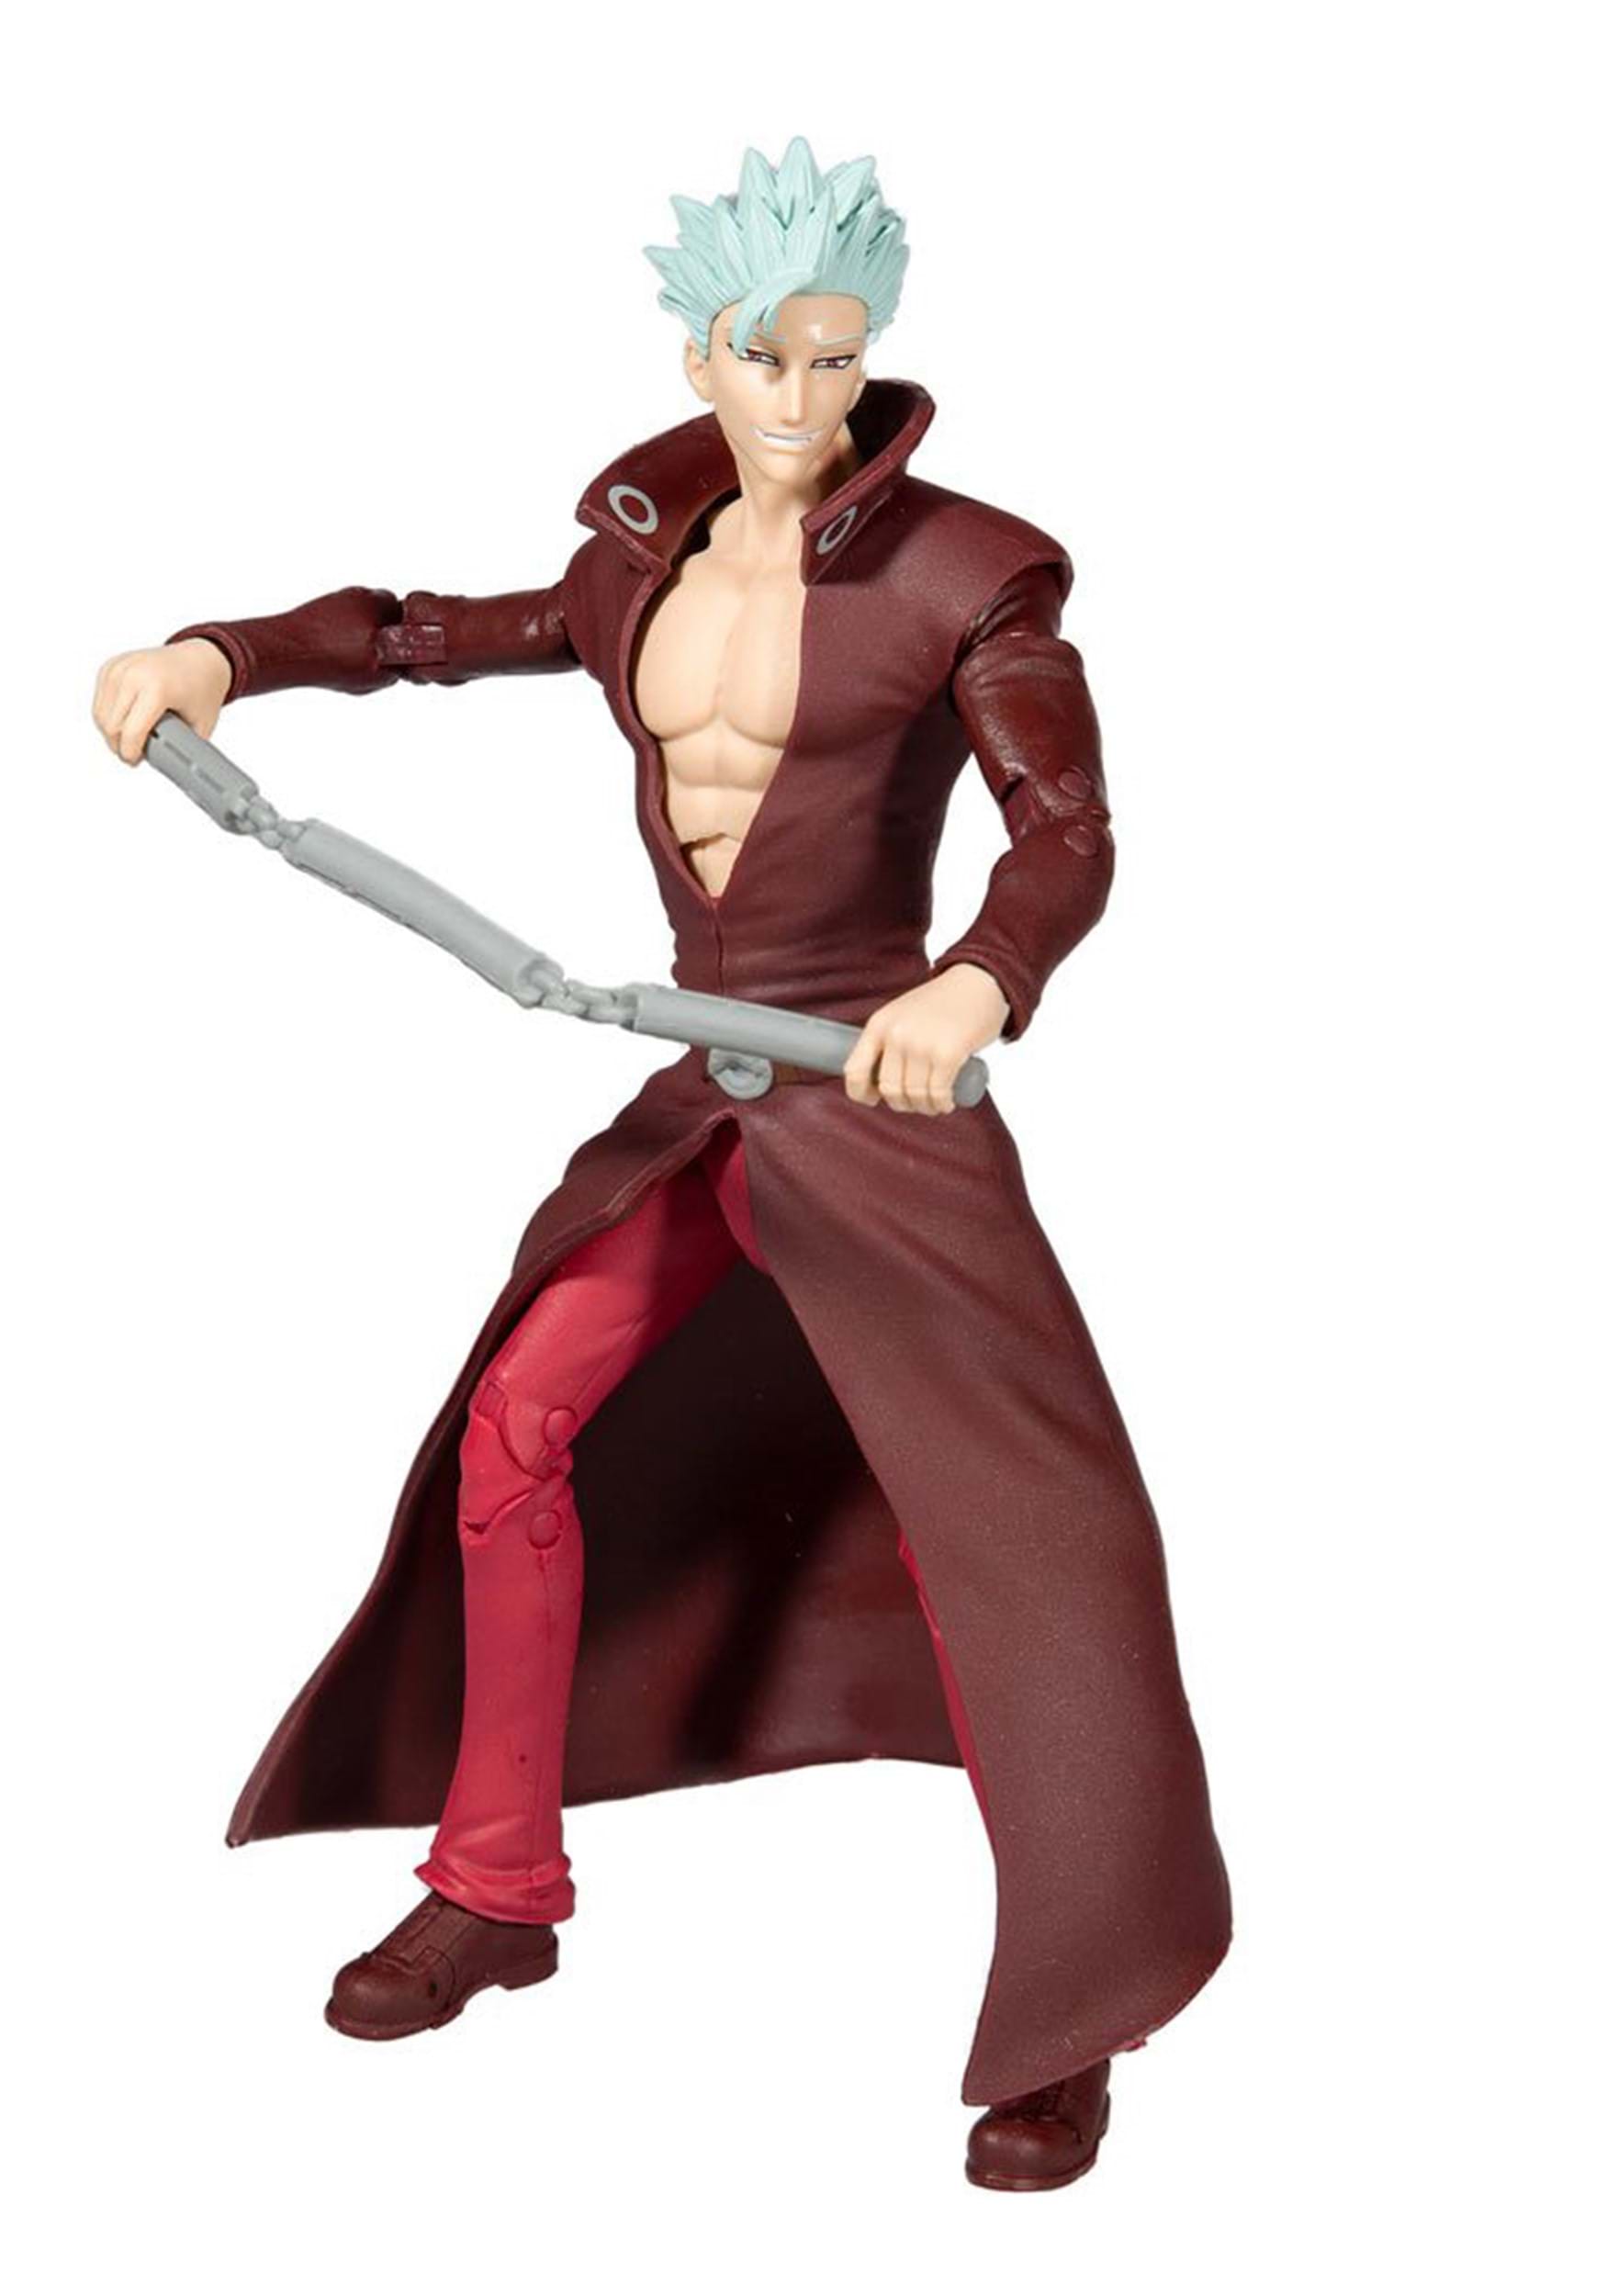 Seven Deadly Sins 7-Inch Ban Ban Scale Action Figure